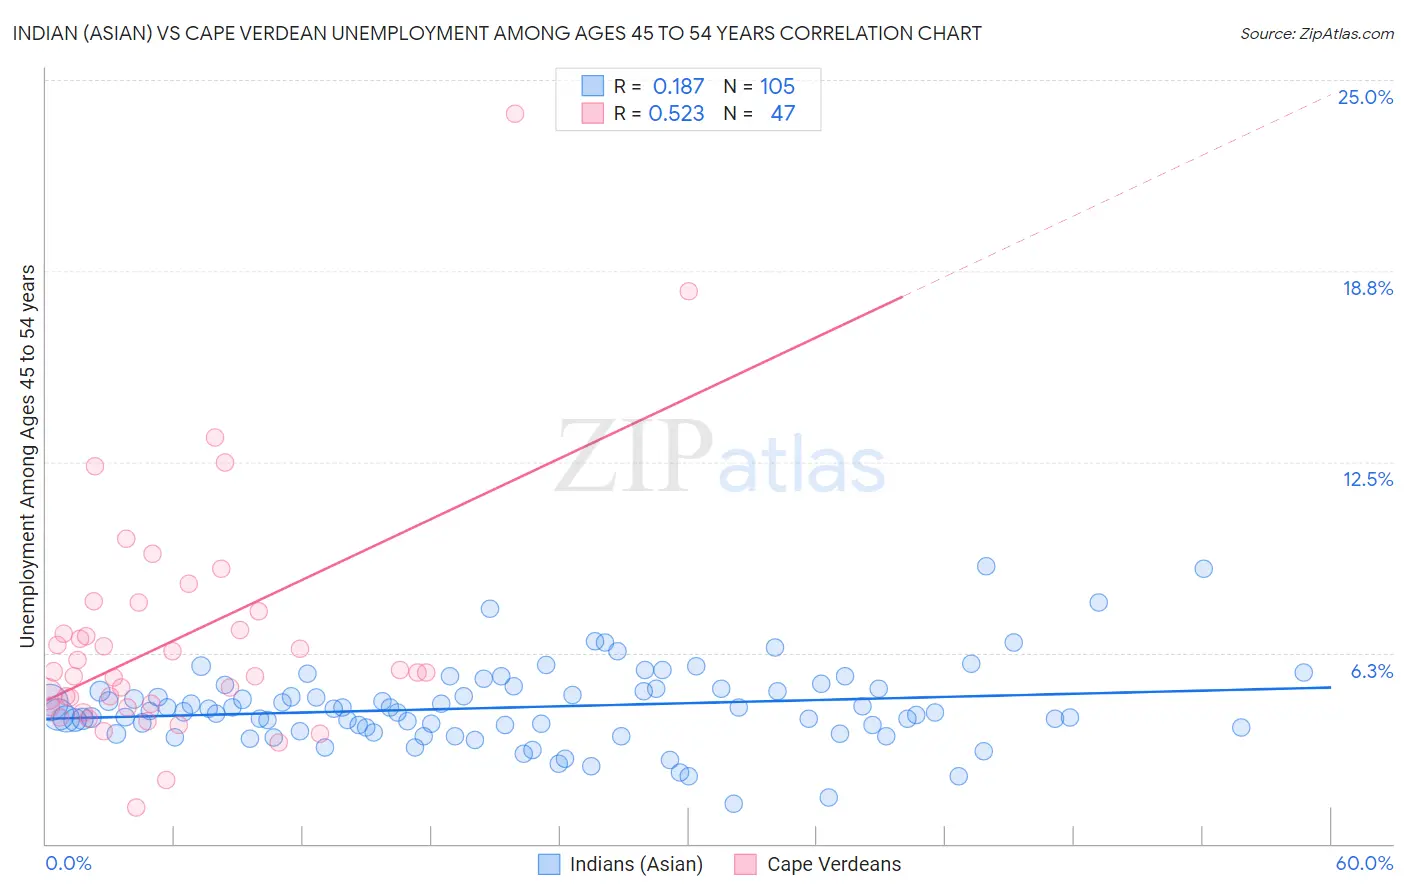 Indian (Asian) vs Cape Verdean Unemployment Among Ages 45 to 54 years